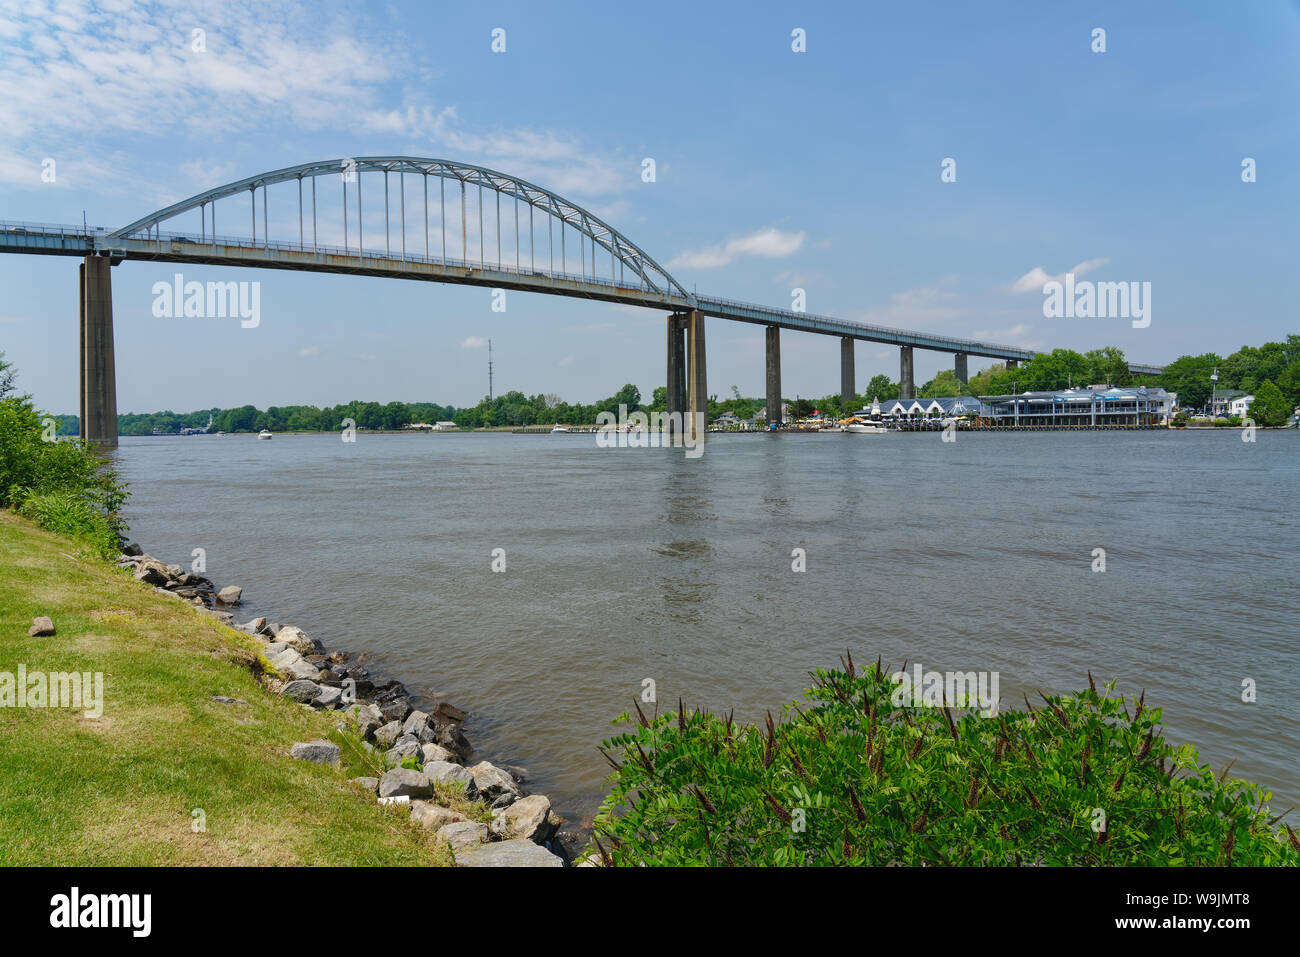 The Chesapeake City bridge crosses over the Chesapeake & Delaware Canal in Maryland and was built in 1949 by the U.S. Army Corps of Engineers Stock Photo